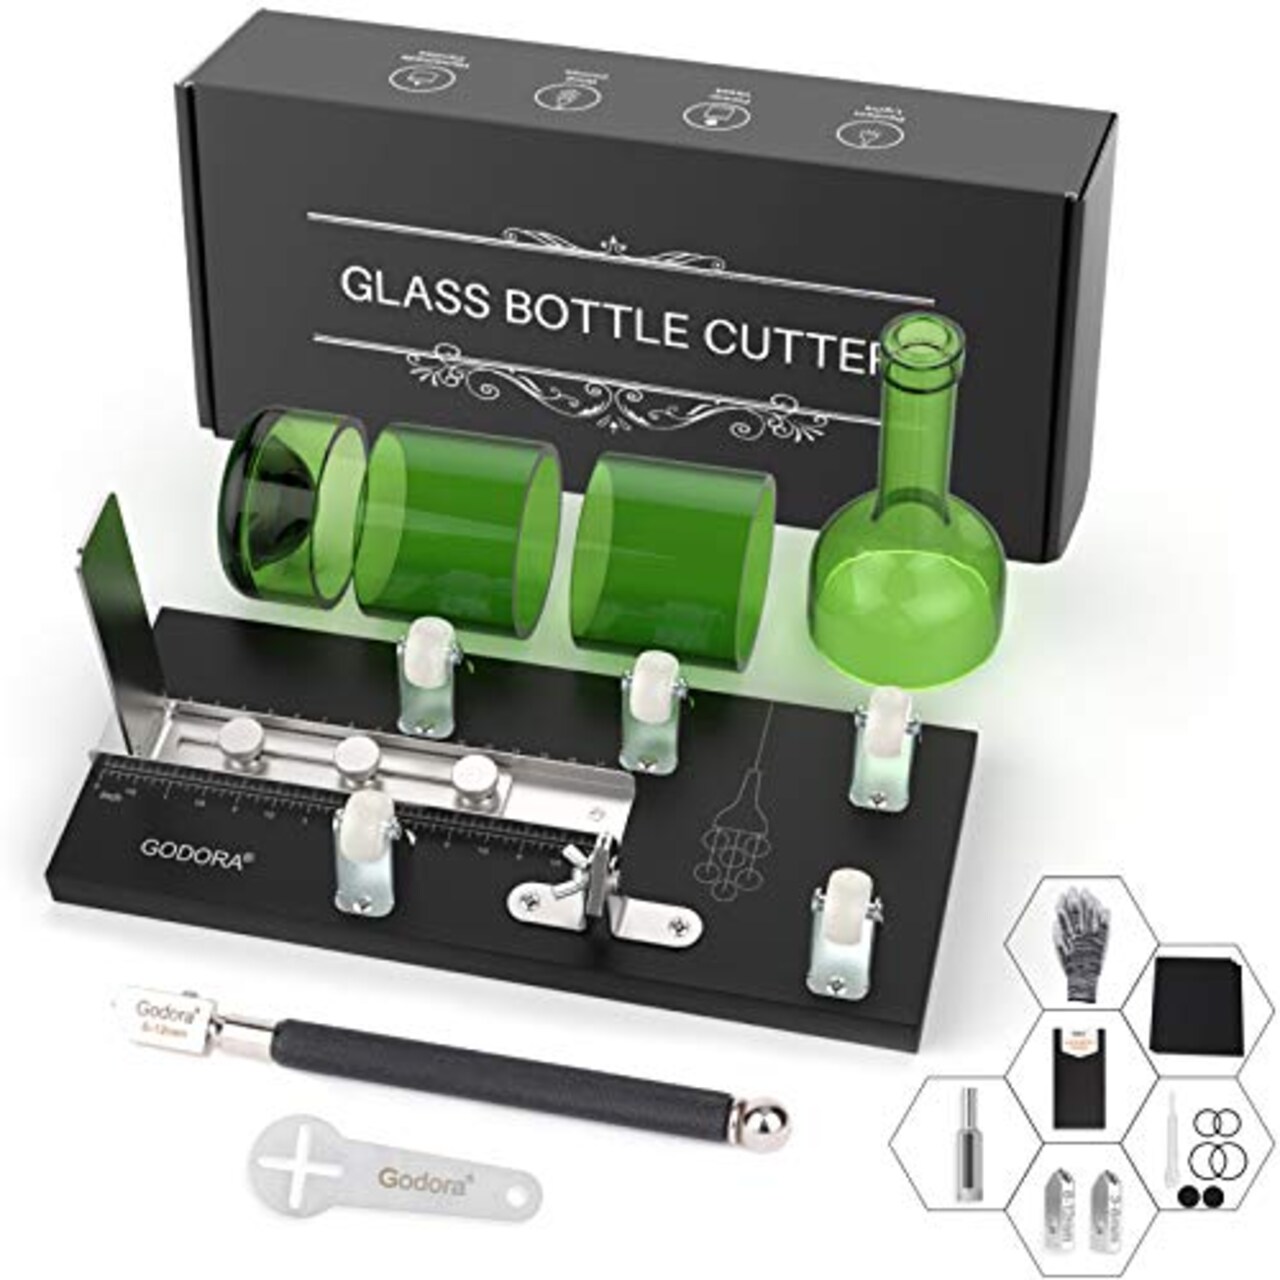 Glass Bottle Cutter, Upgraded Glass Cutter for Bottles & Glass Cutter  Bundle - DIY Machine for Cutting Wine, Beer or Soda Round Bottles & Mason  Jars, Perfect Score Bottle Cutter